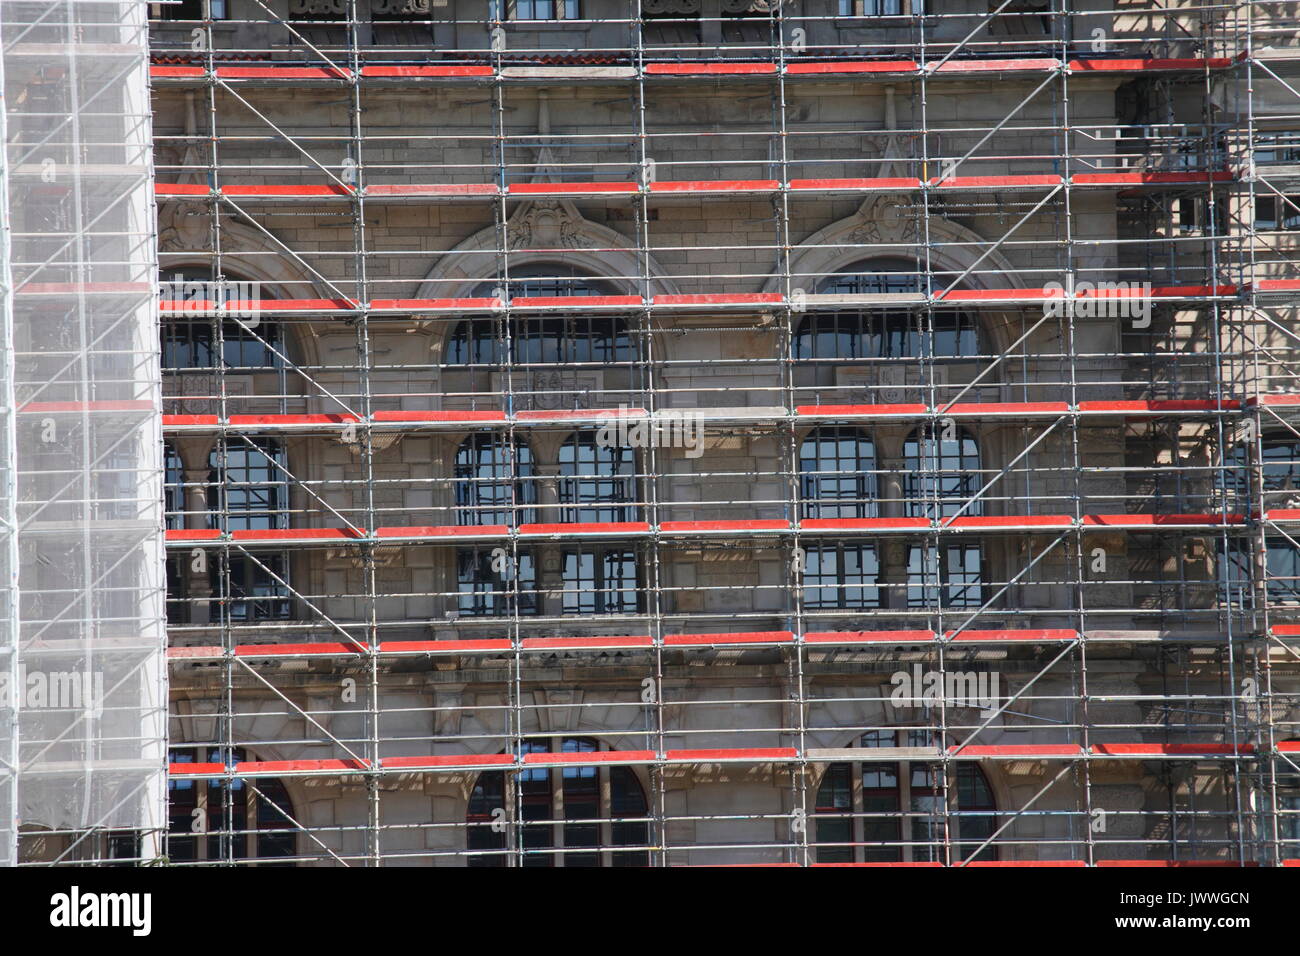 Construction site on the new city Hall in Hannover, Germany Stock Photo